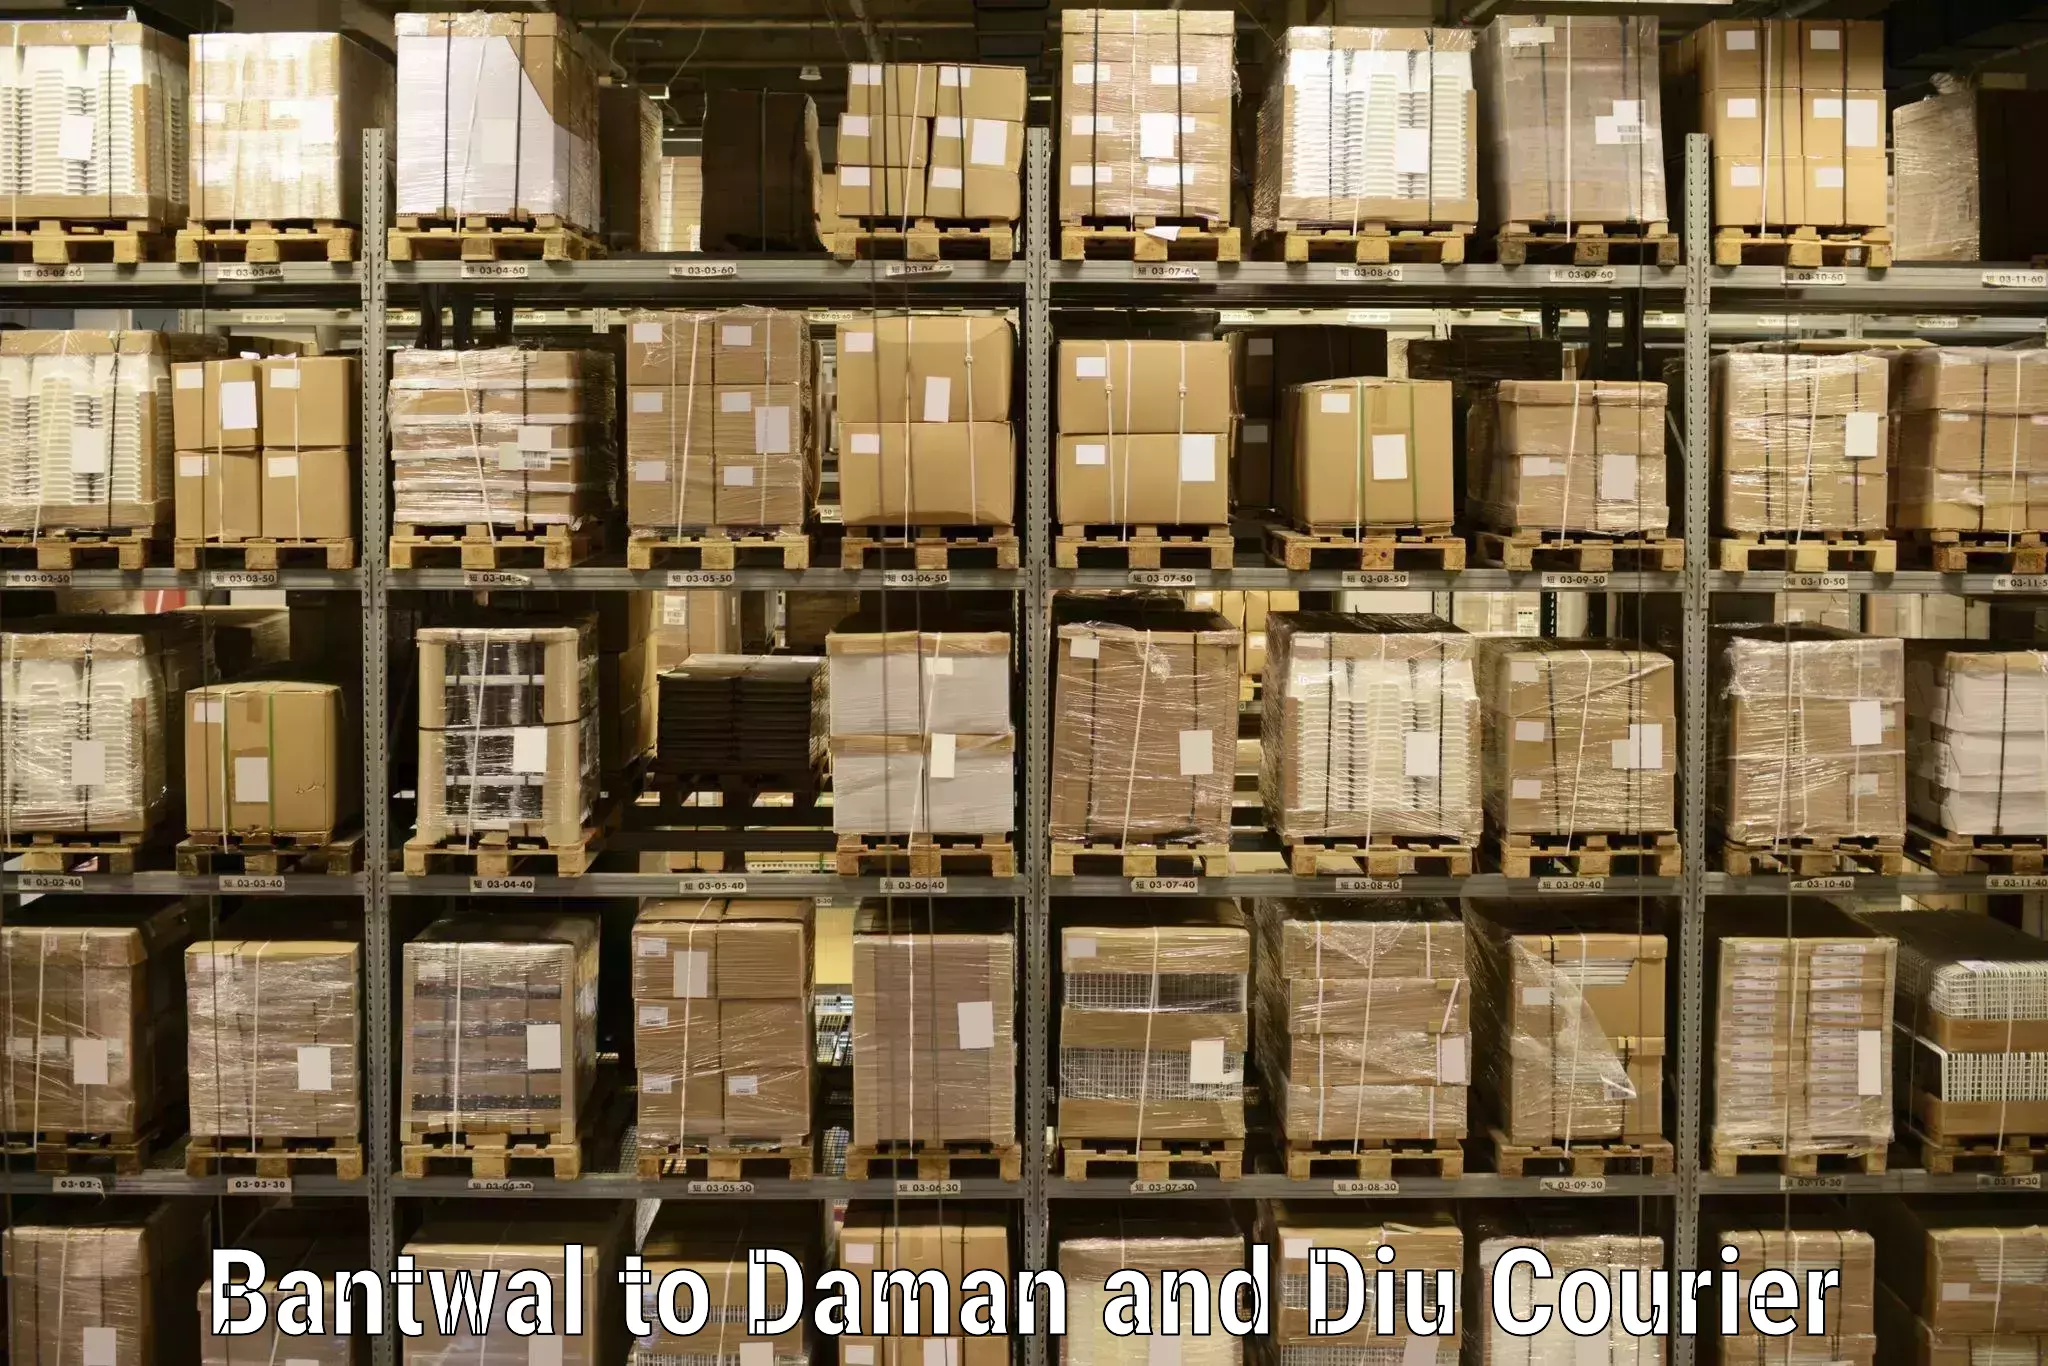 Subscription-based courier Bantwal to Daman and Diu